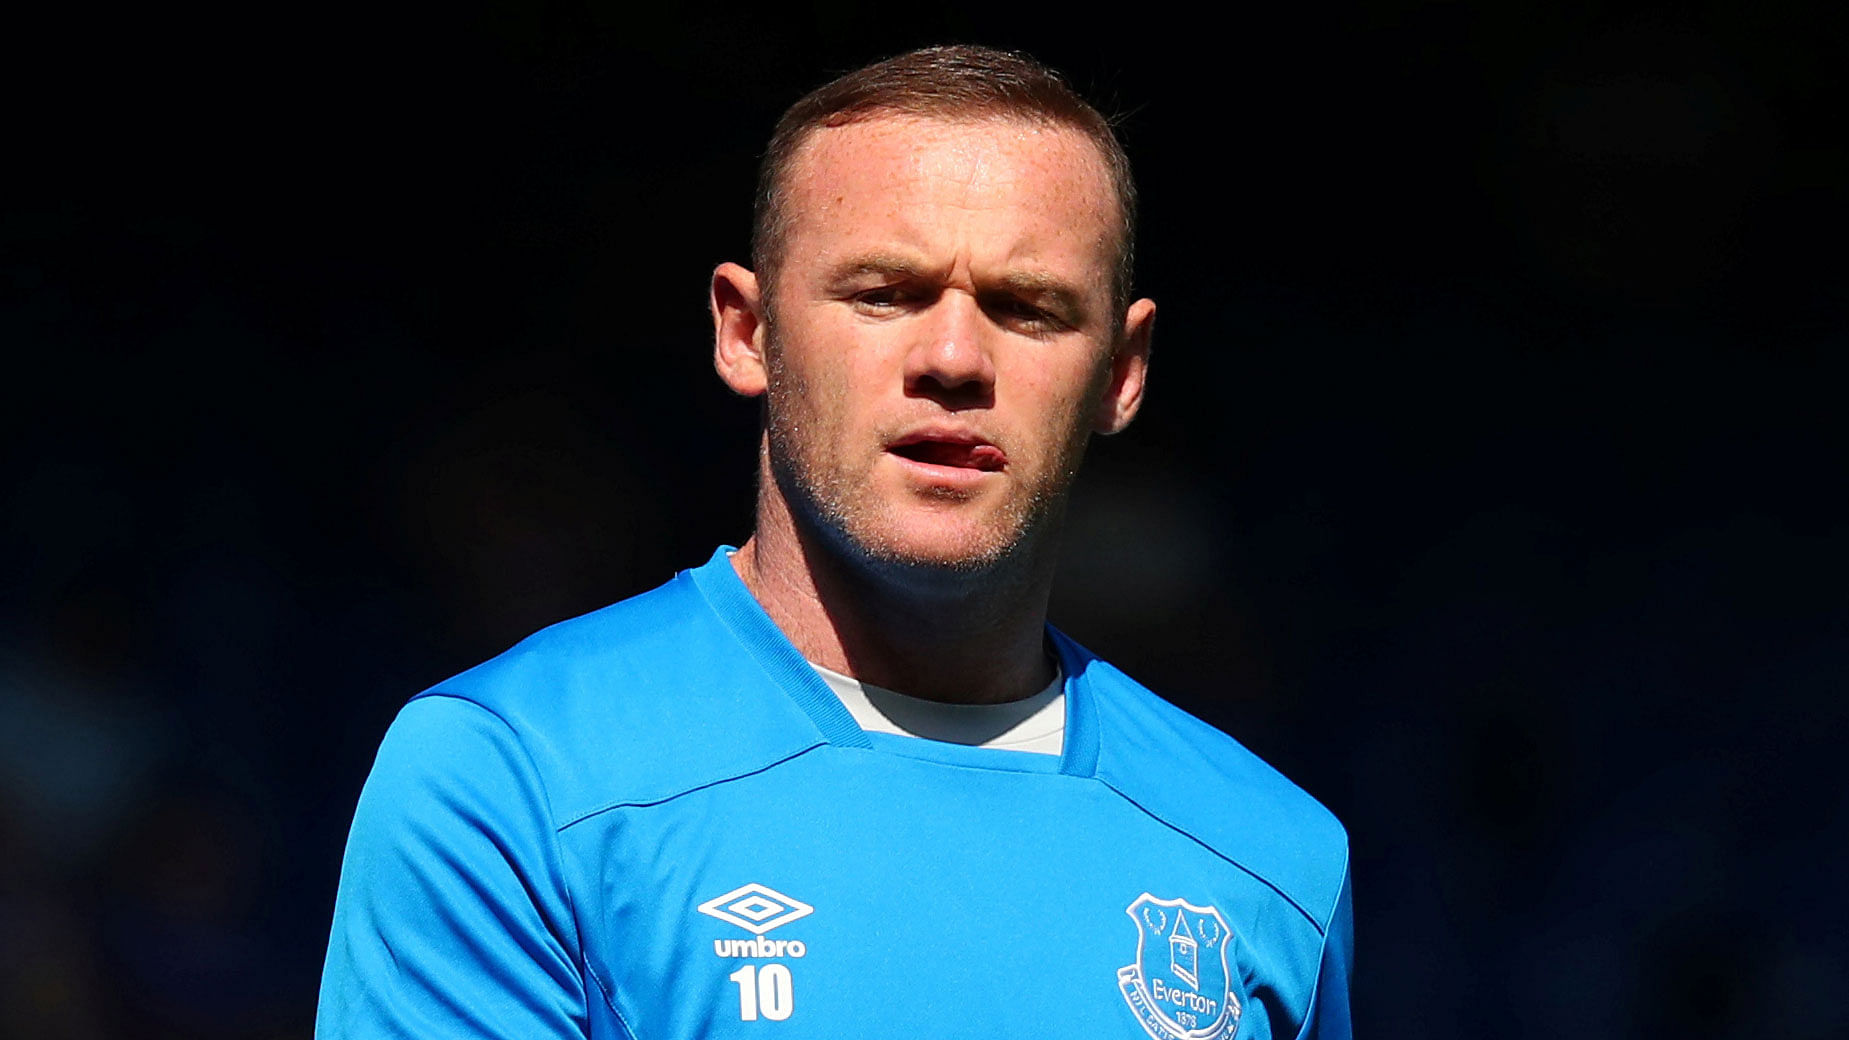 File photo of Wayne Rooney who has cut short his contract with Everton to play in the MLS.